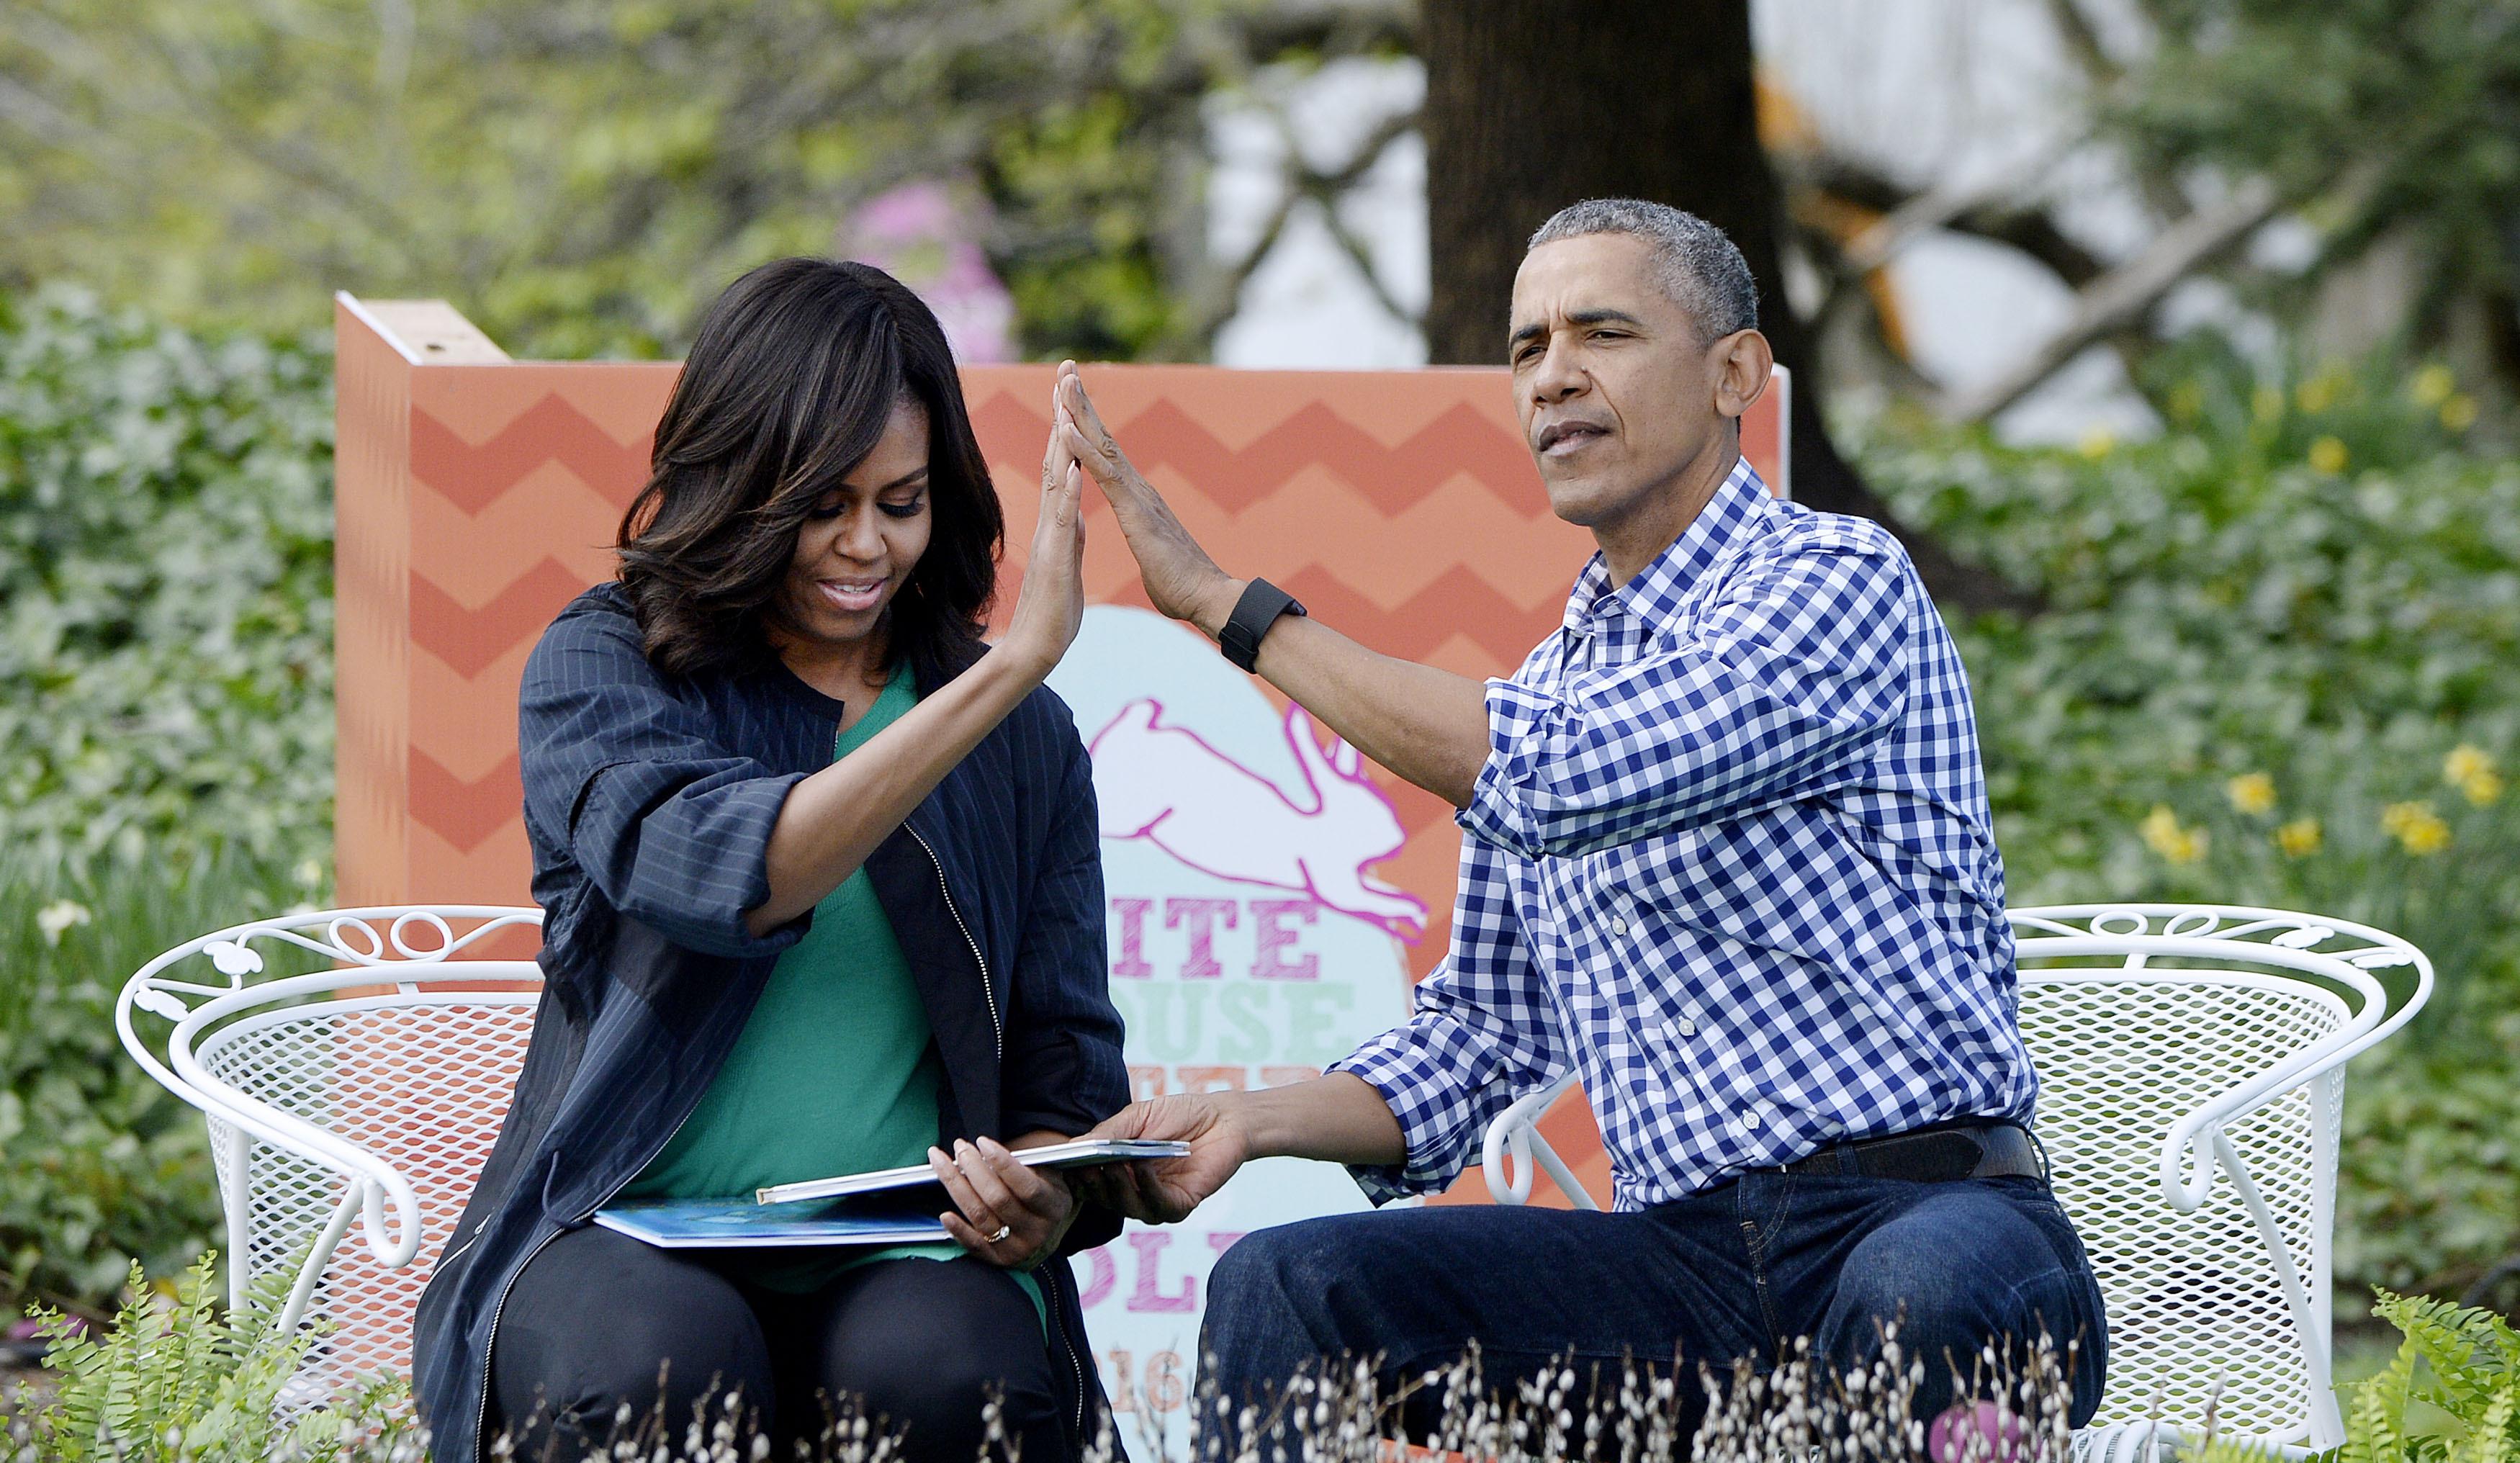 United States President Barack Obama (R) and first lady Michelle Obama (L) read "Where the wild things are"during the White House Easter Egg Roll on the South Lawn of the White House March 28, 2016 in Washington, DC.  Reporters / Photoshot